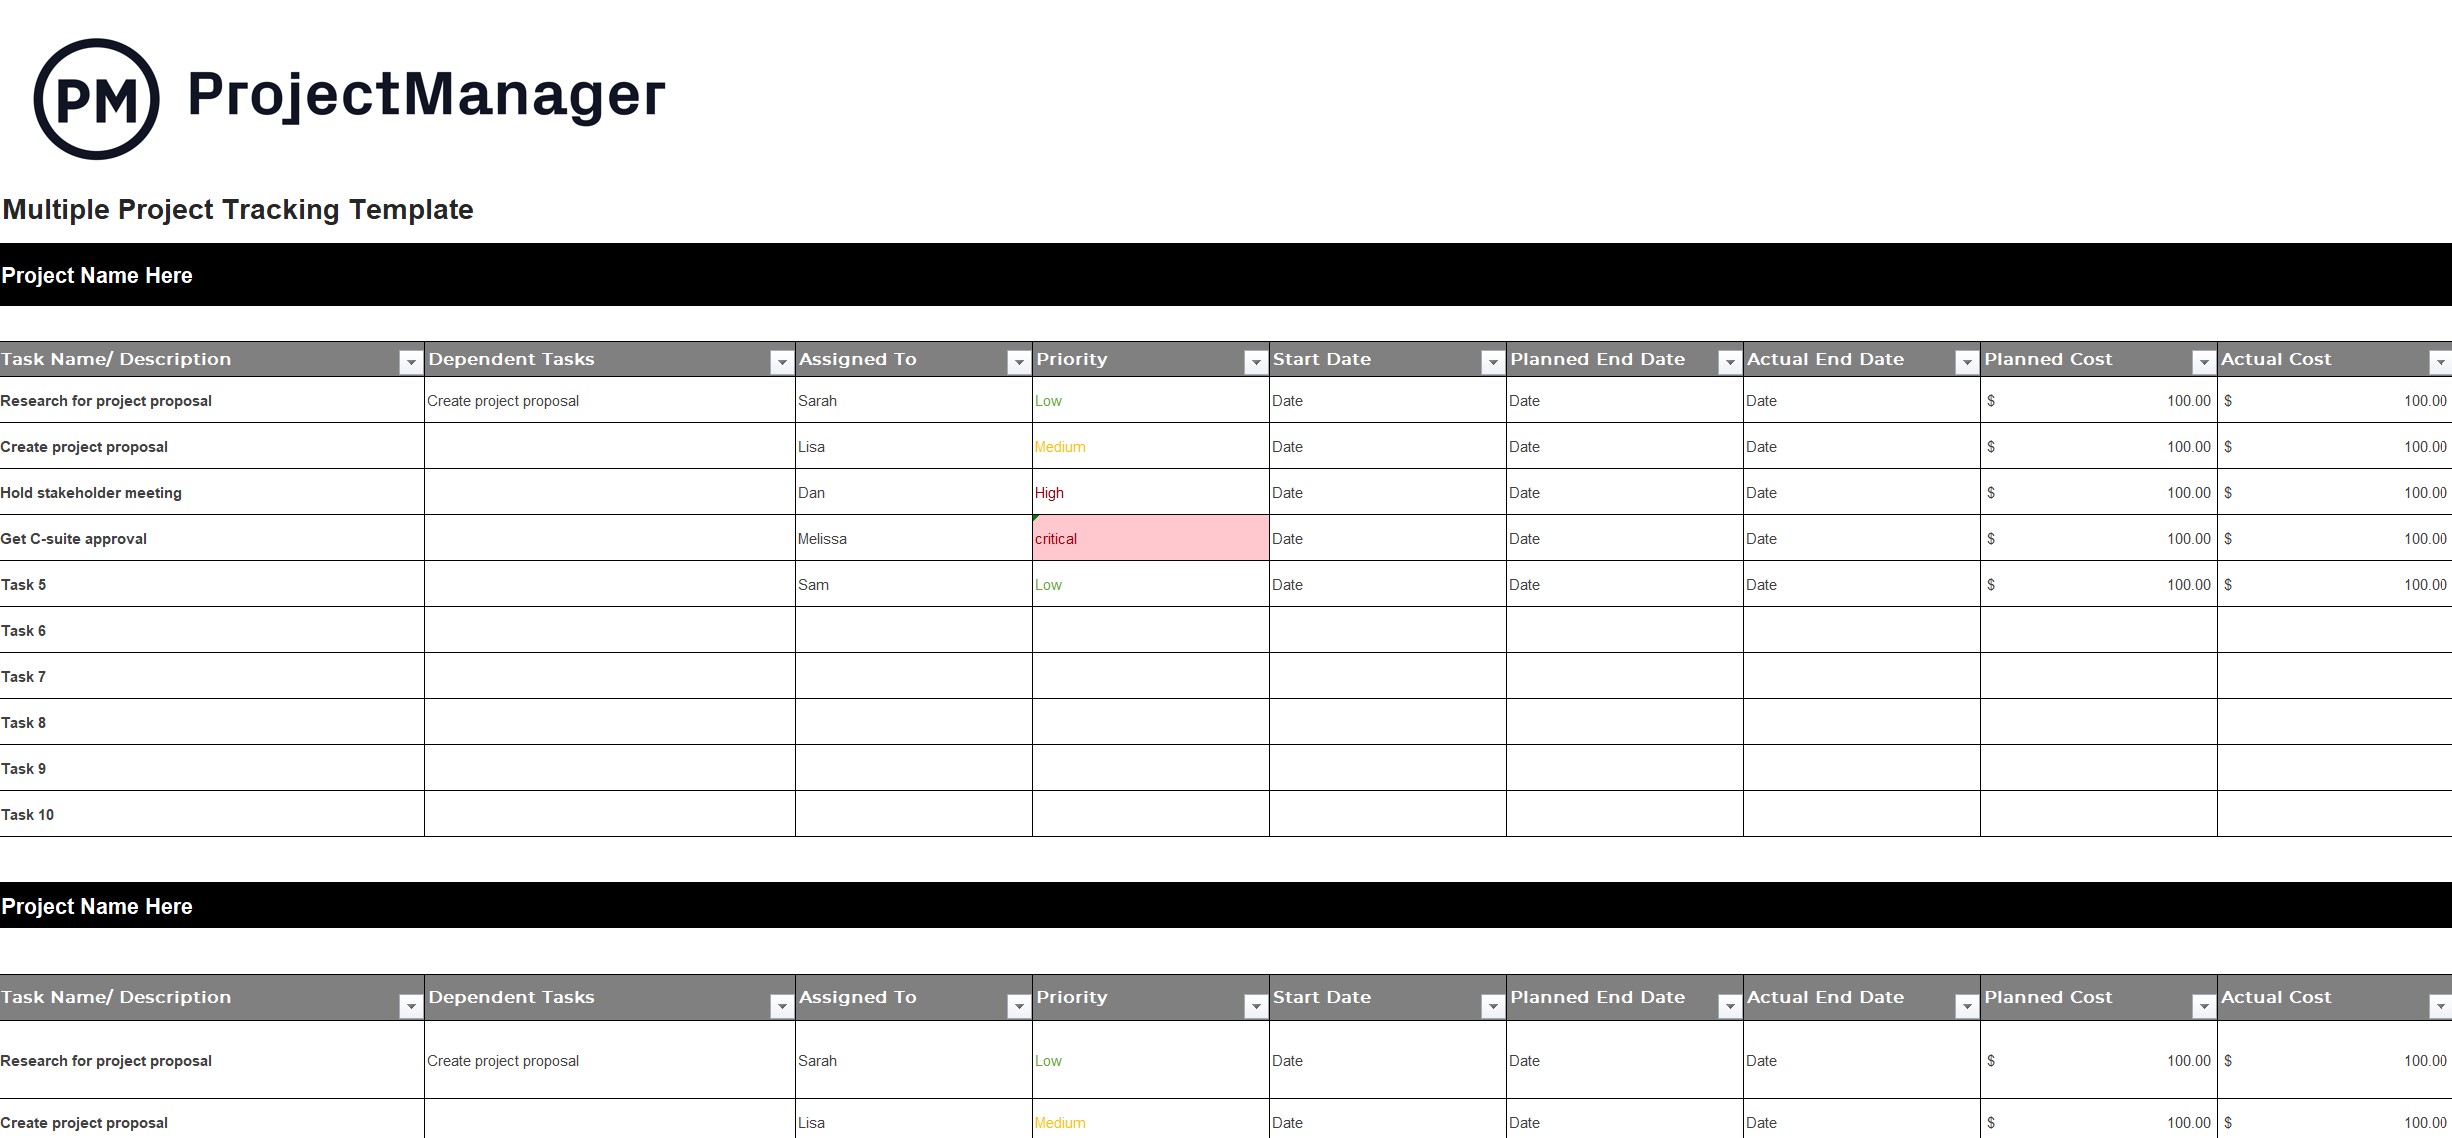 ProjectManager's multiple project tracking template for Excel